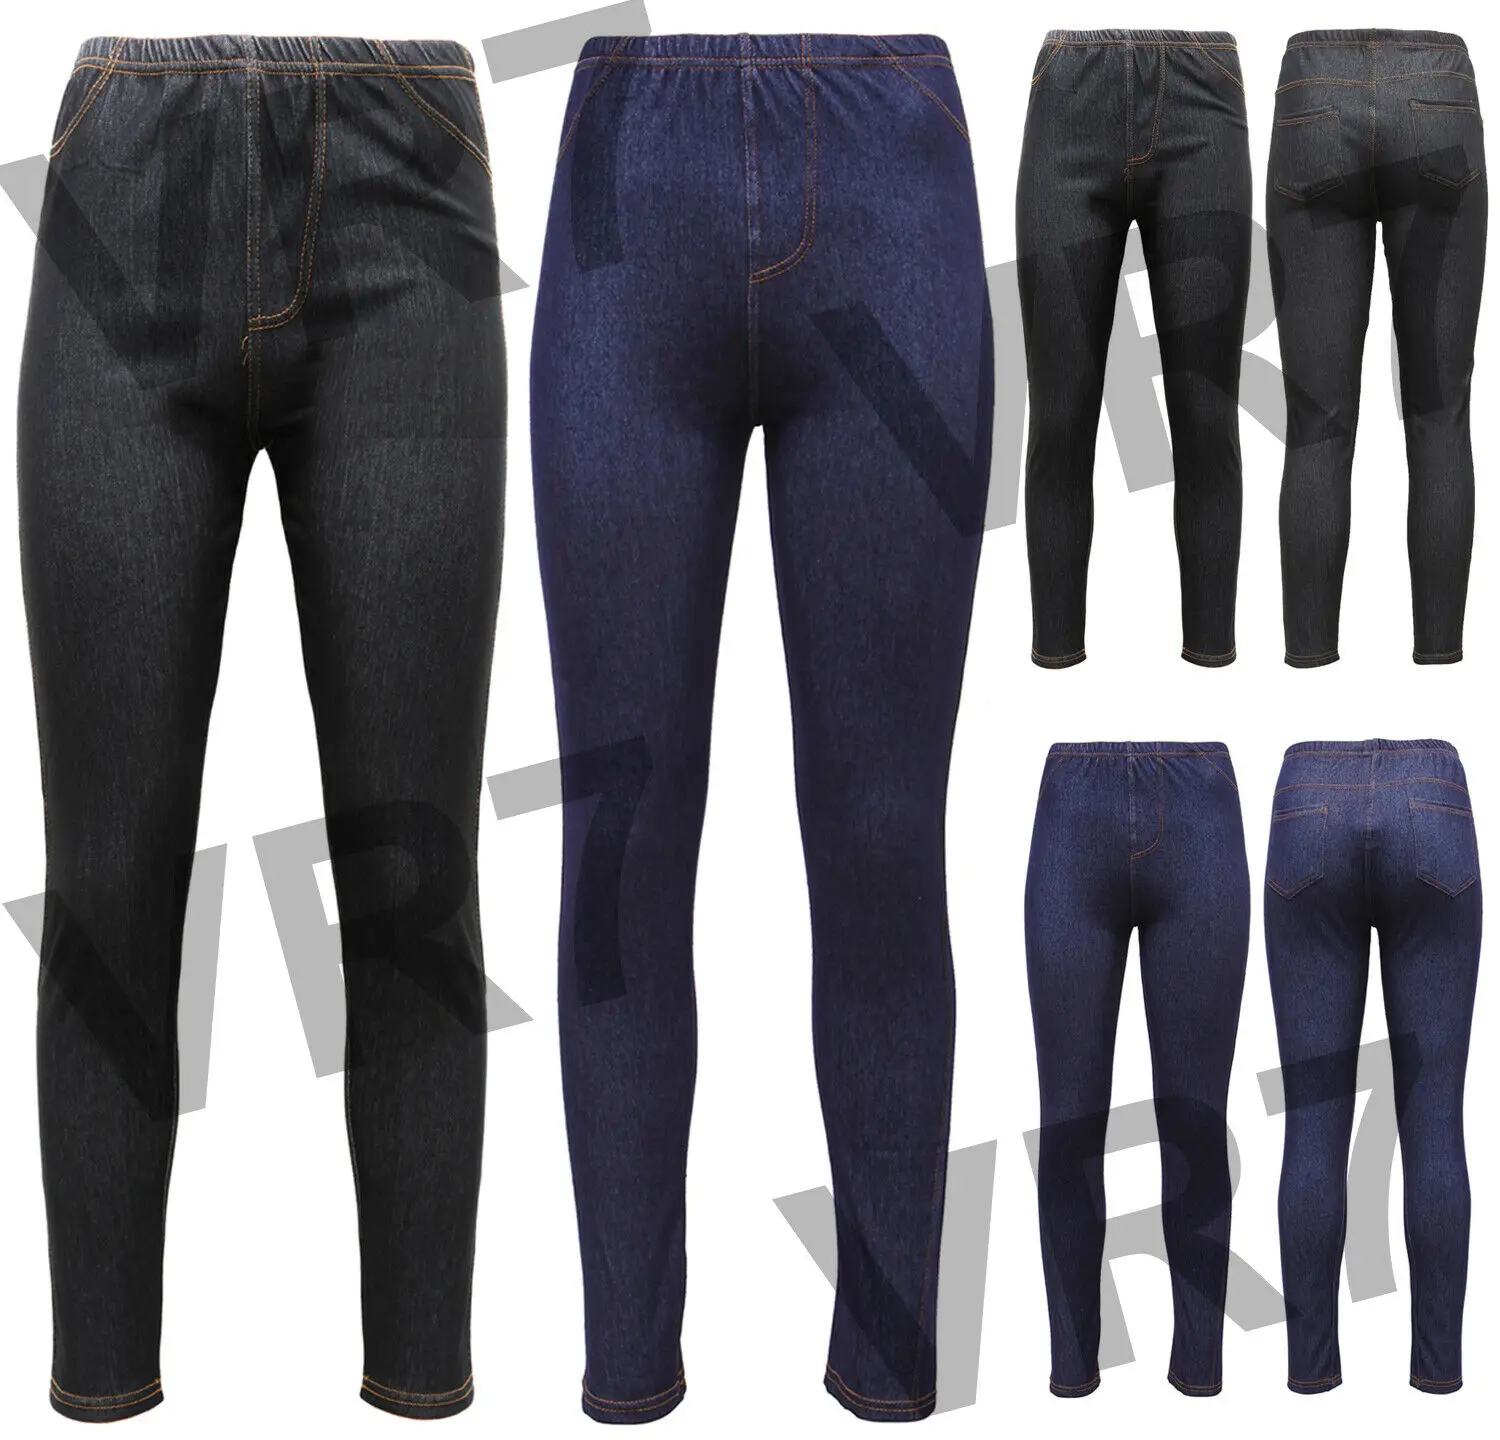 

WOMENS HIGH WAISTED STRETCHY SKINNY JEANS LADIES DENIM JEGGINGS PANTS SIZE 8-26